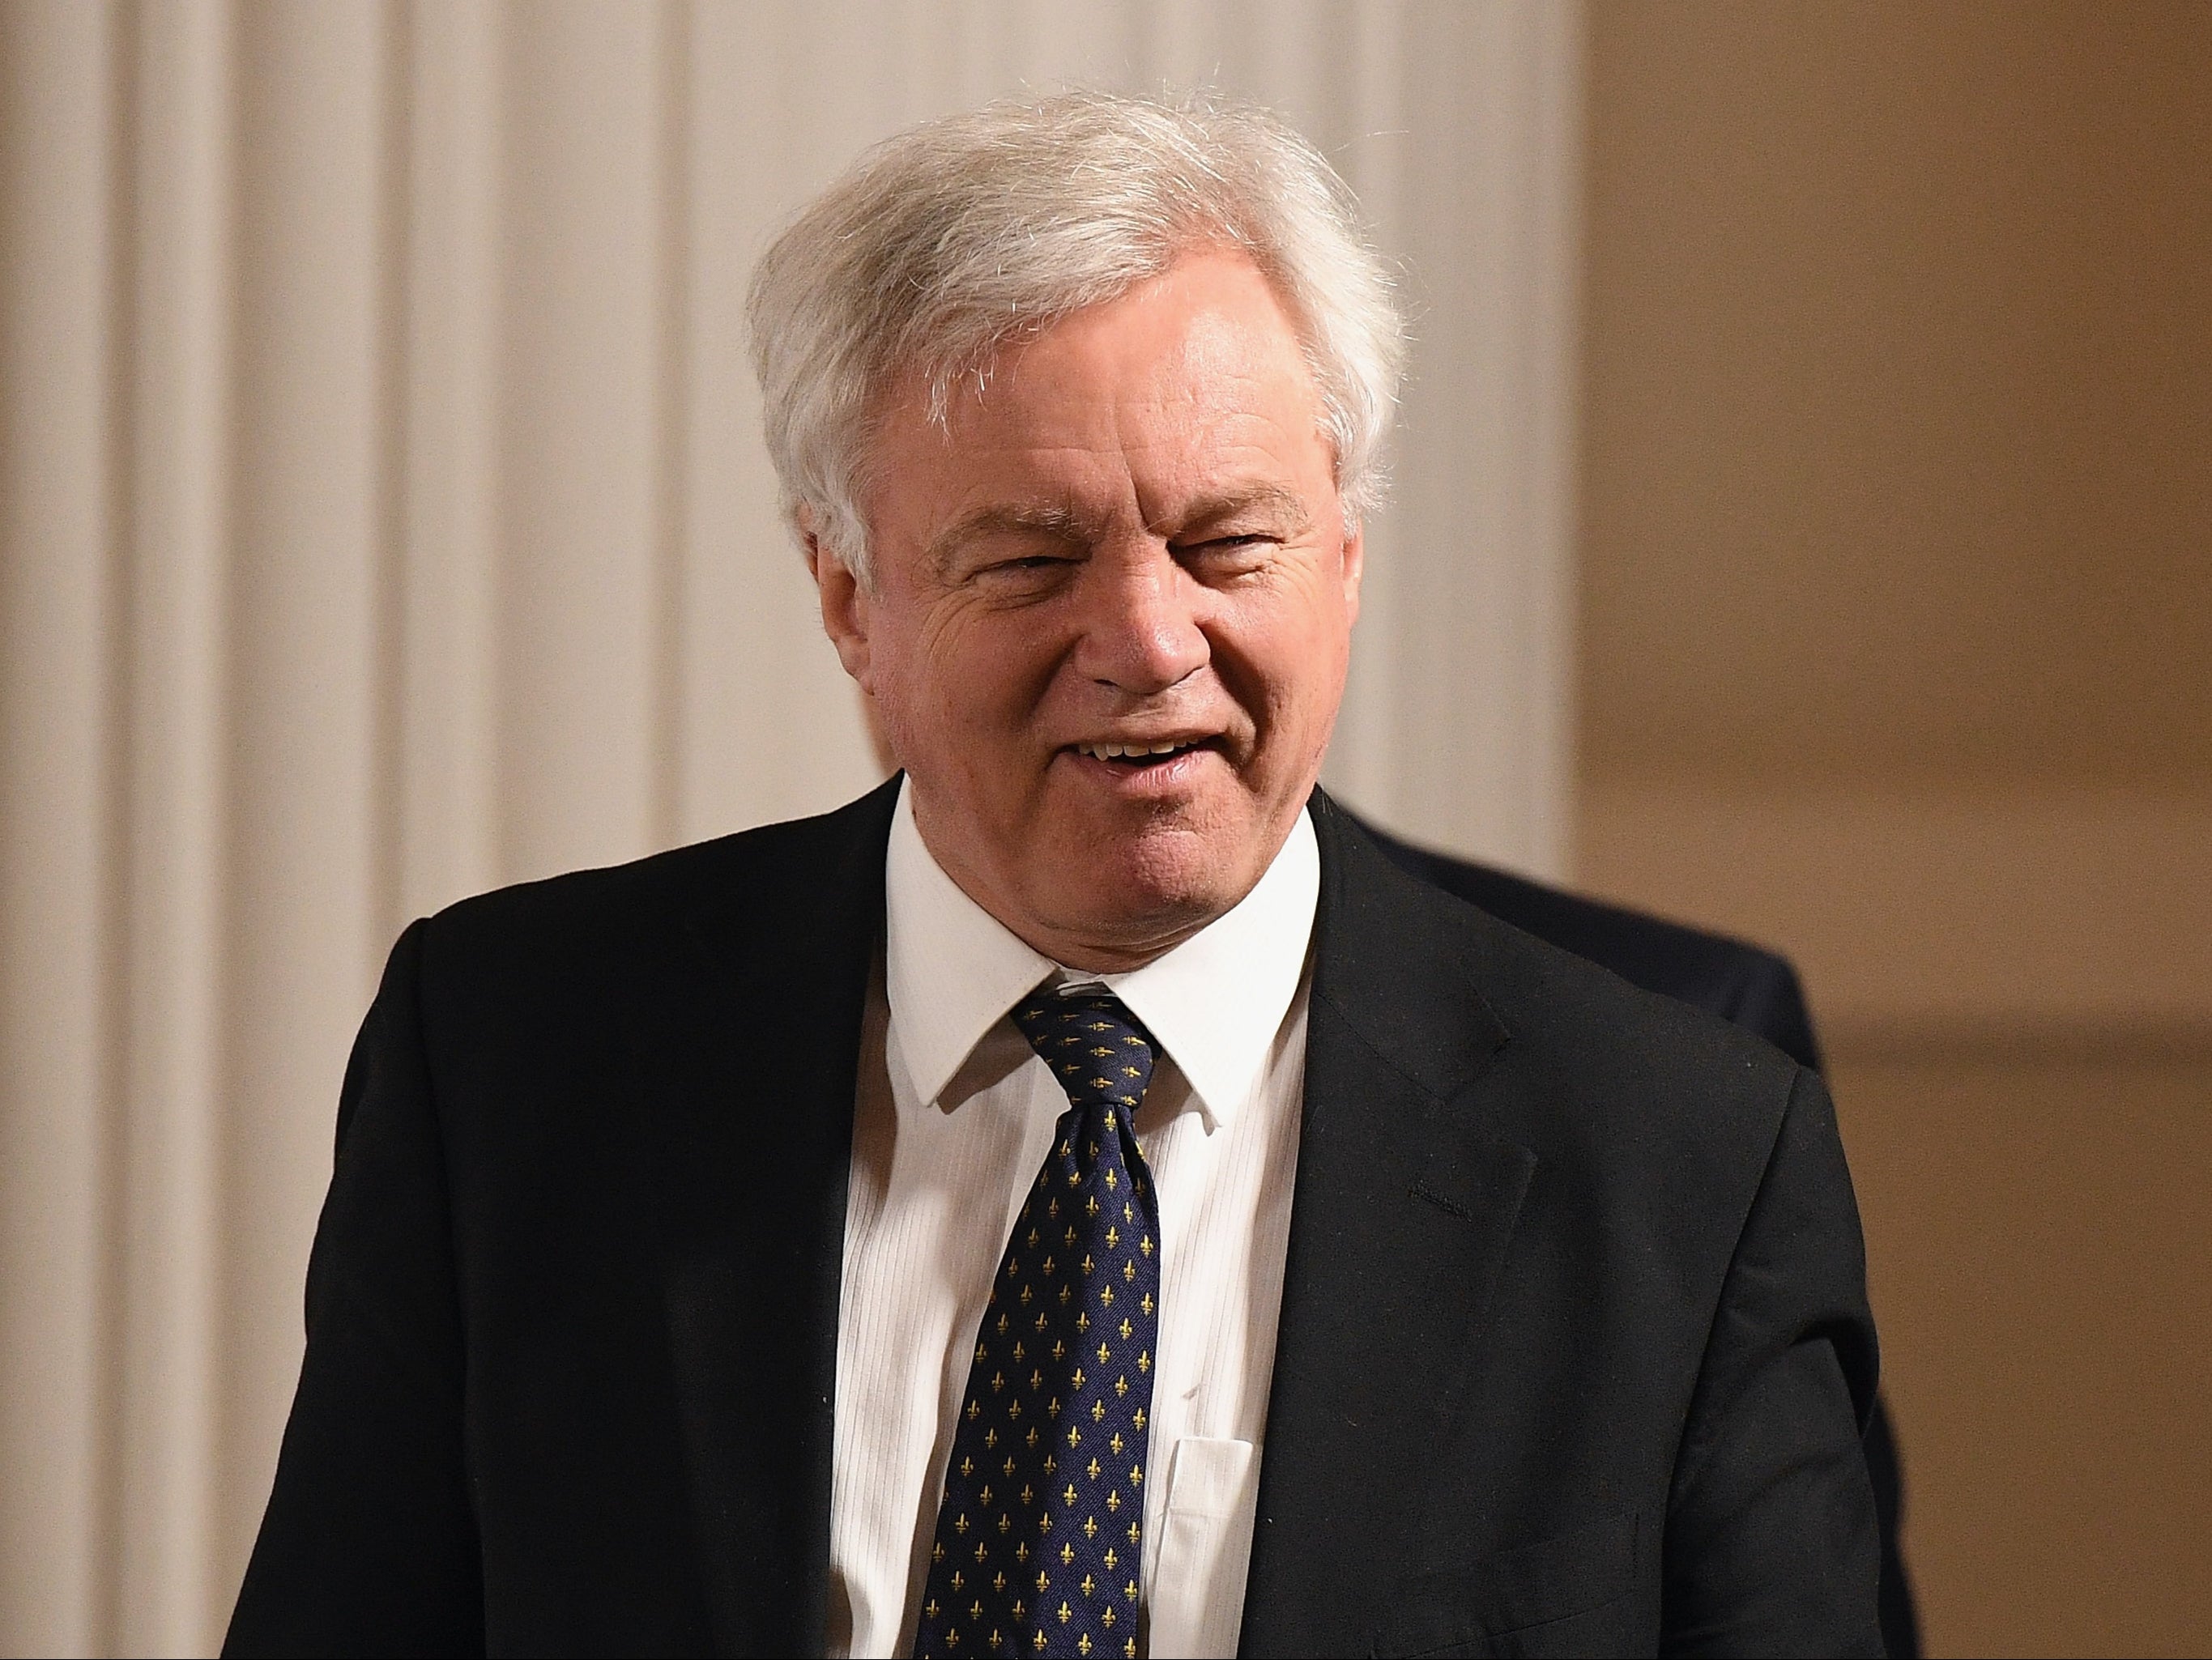 Tory MP and former Brexit minister David Davis